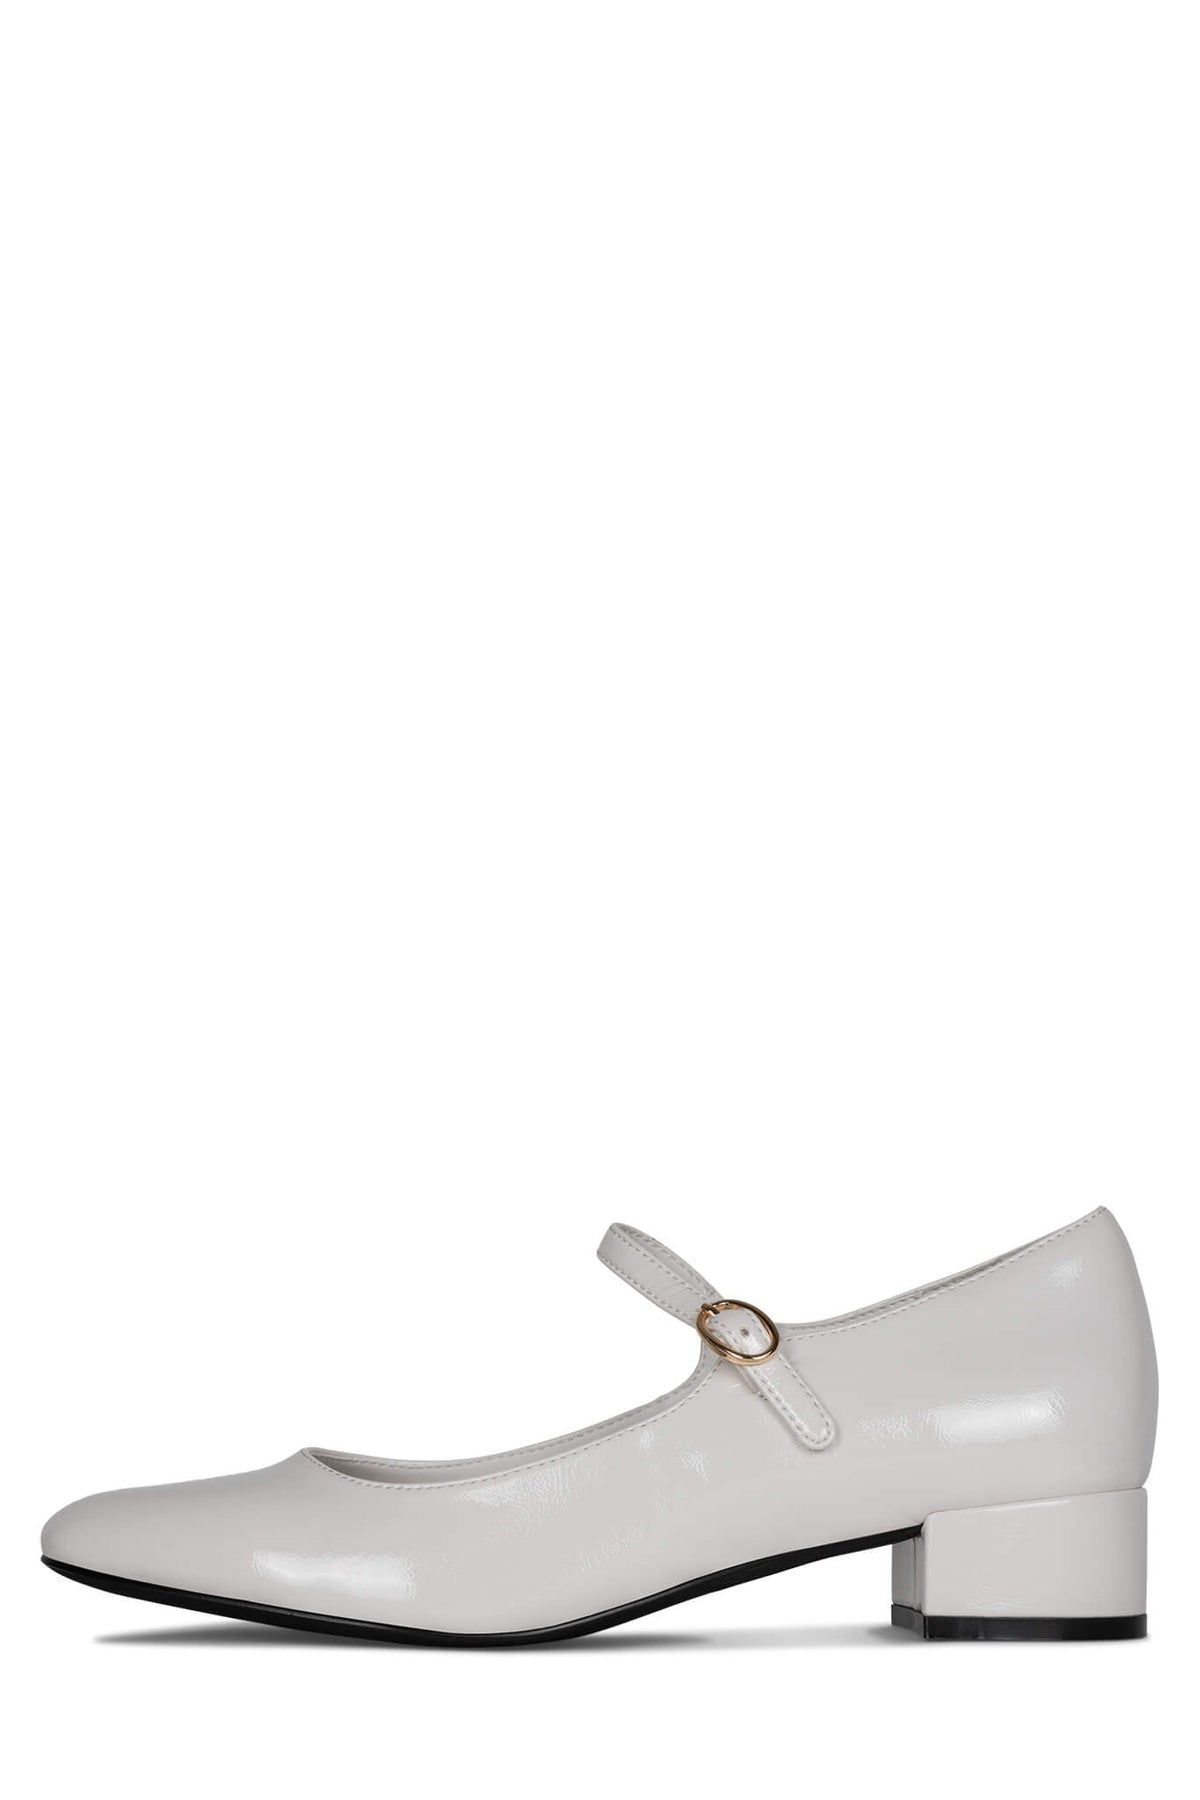 TOP-TIER Jeffrey Campbell Mary-Janes White Crinkle Patent